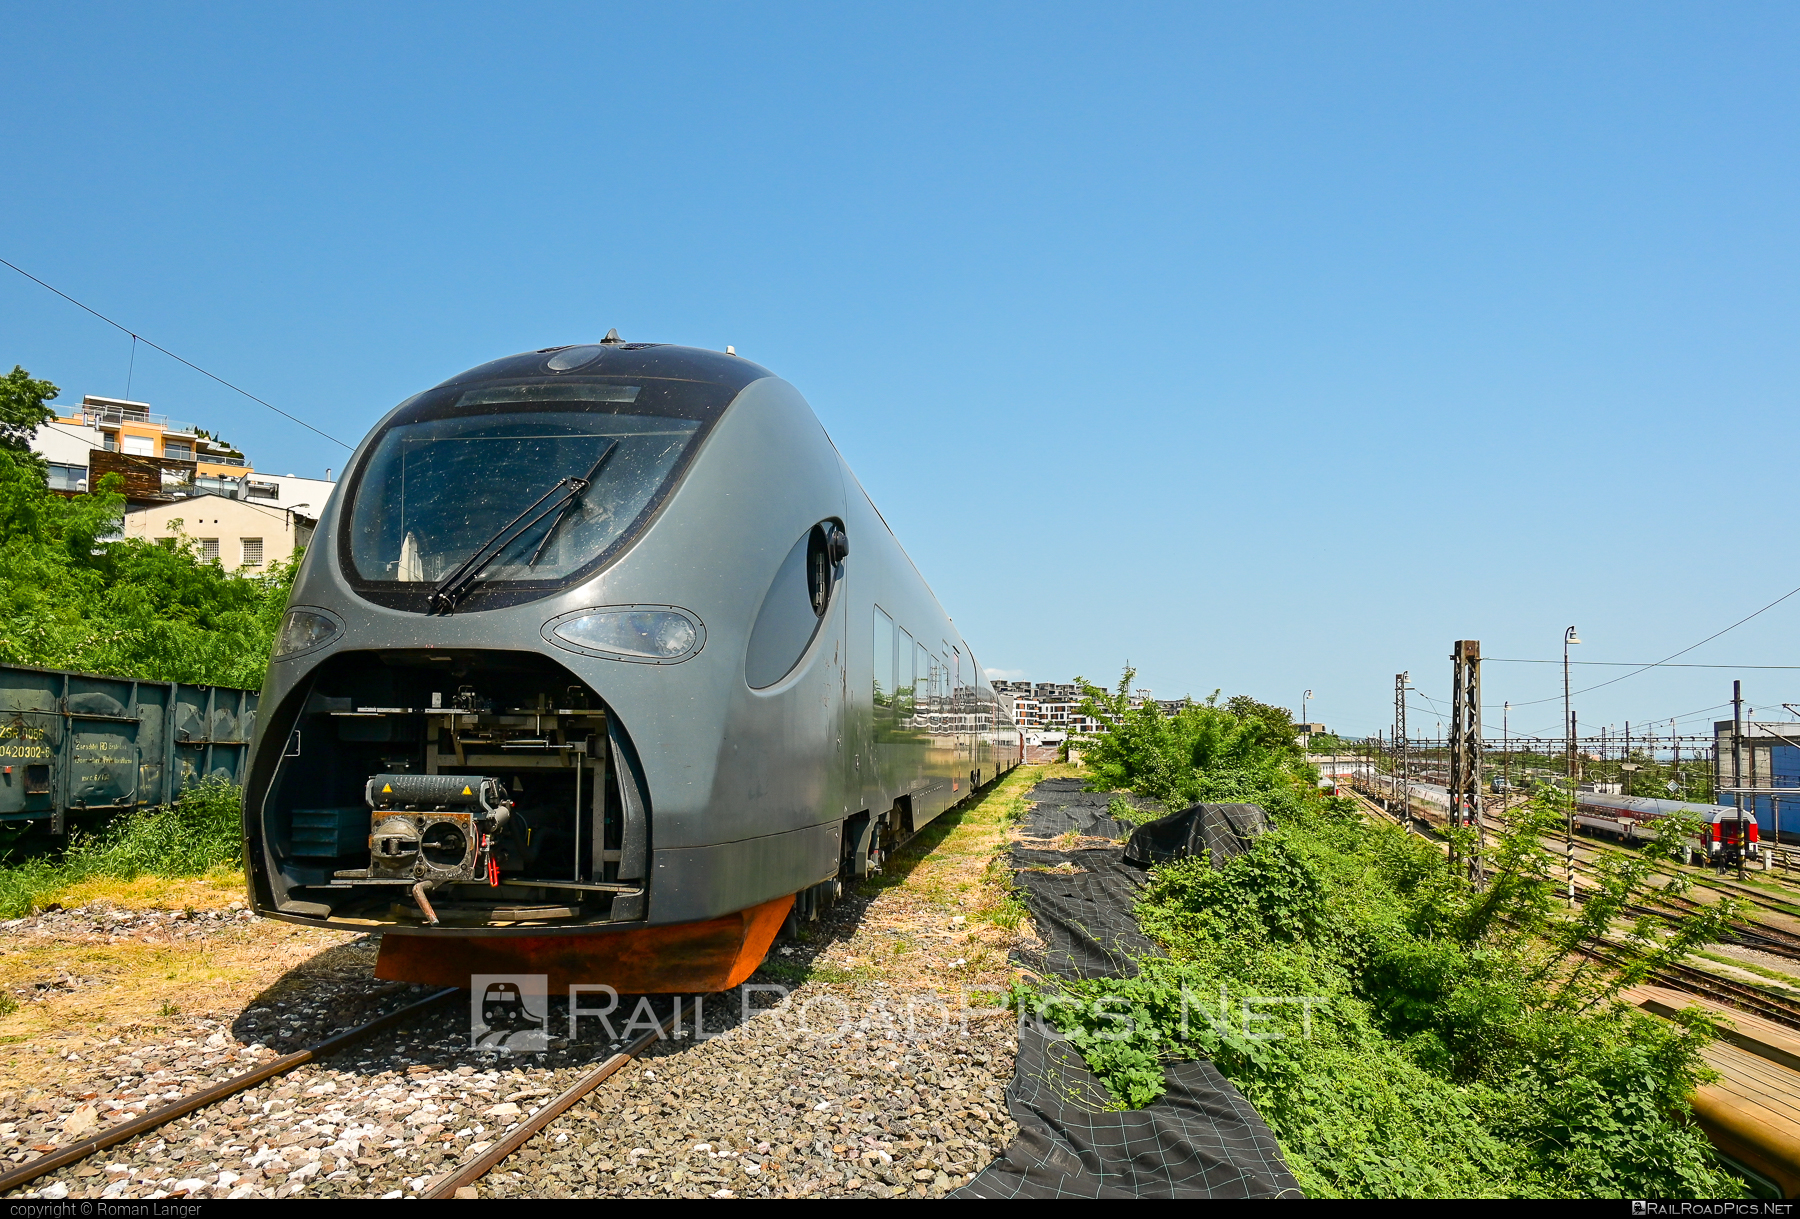 CRRC ZELC Sirius - 665 002-2 operated by Unknown #crrc #crrcSirius #crrcZelc #crrcZelcVerkehrstechnikGmbh #crrcZhuzhou #leoexpress #sirius